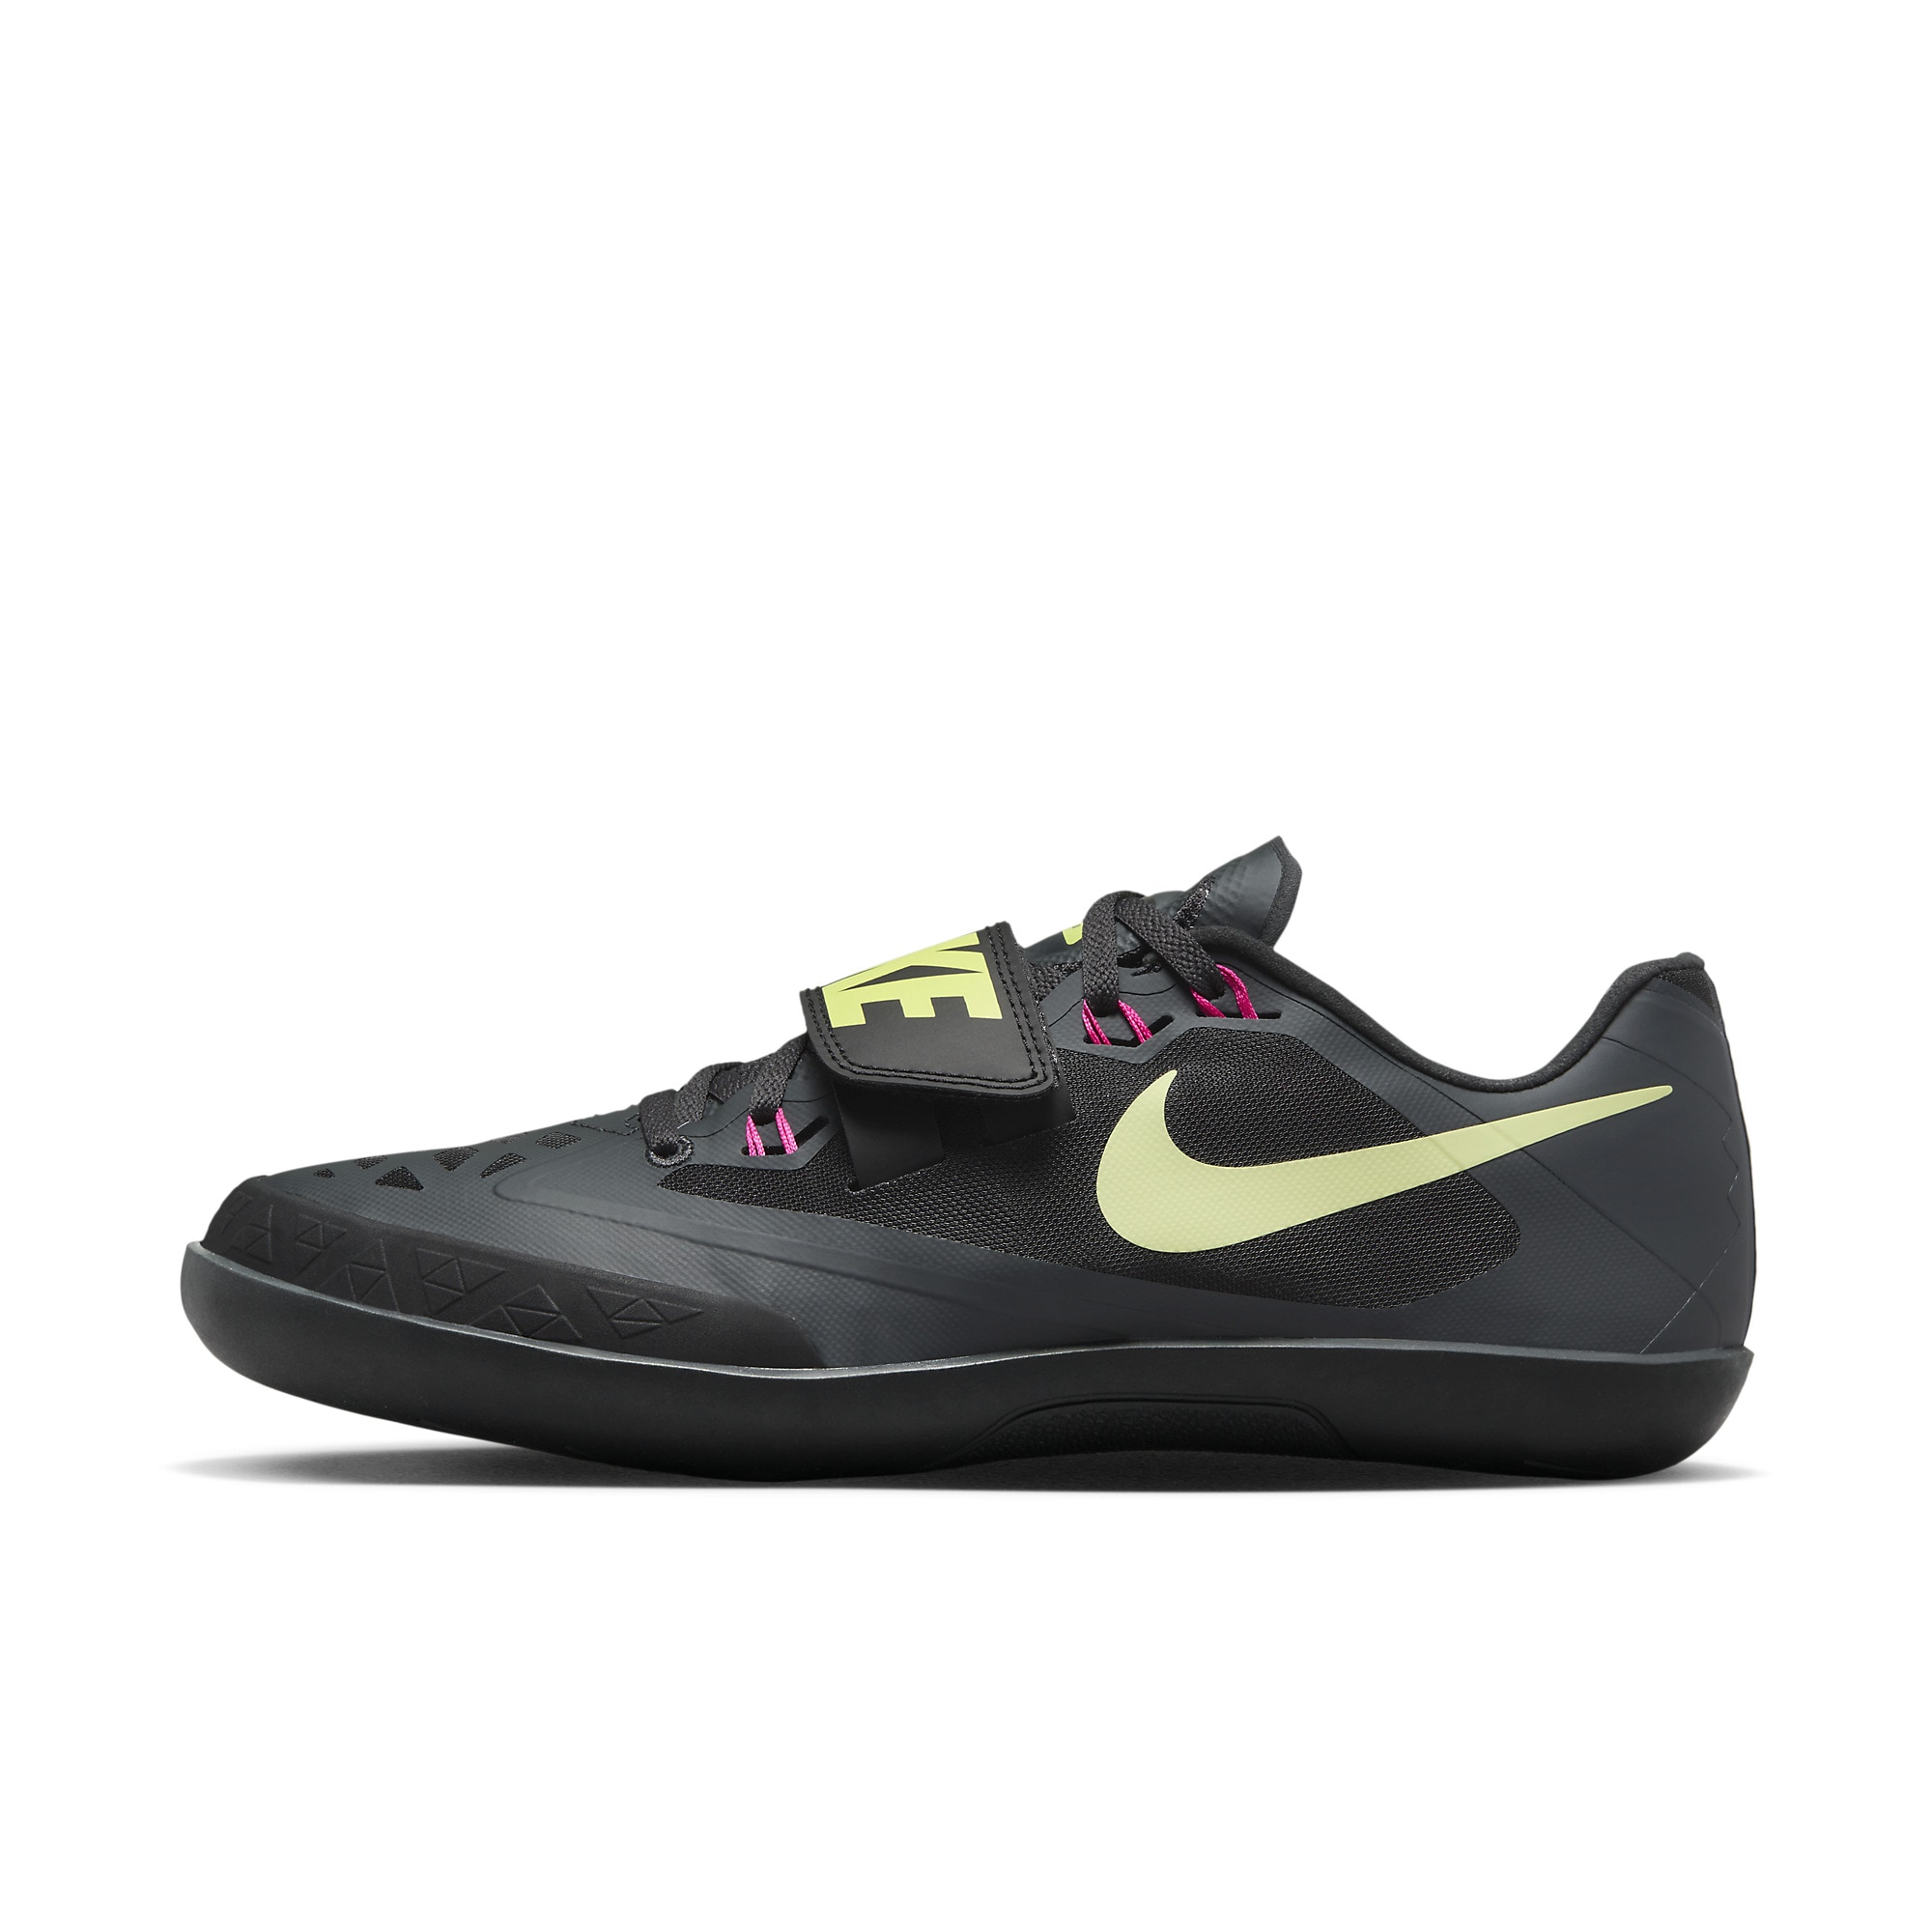 Nike Zoom SD 4 - Anthracite/Fierce Pink-Black - Mens Shoes | Pro:Direct ...